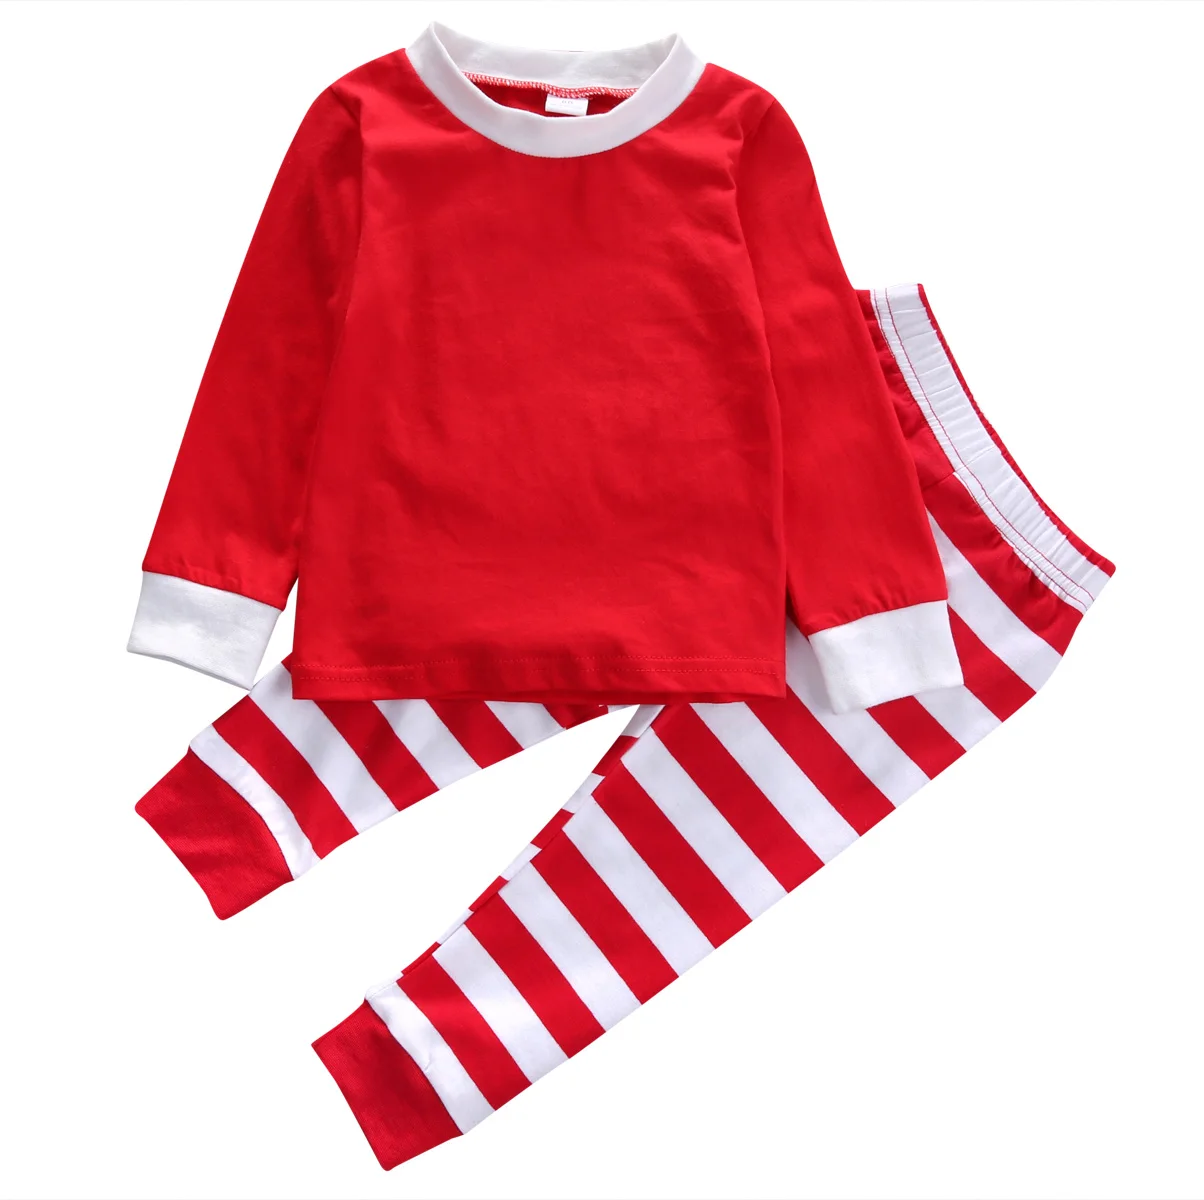 Compare Prices on Striped Christmas Pajamas- Online Shopping/Buy ...